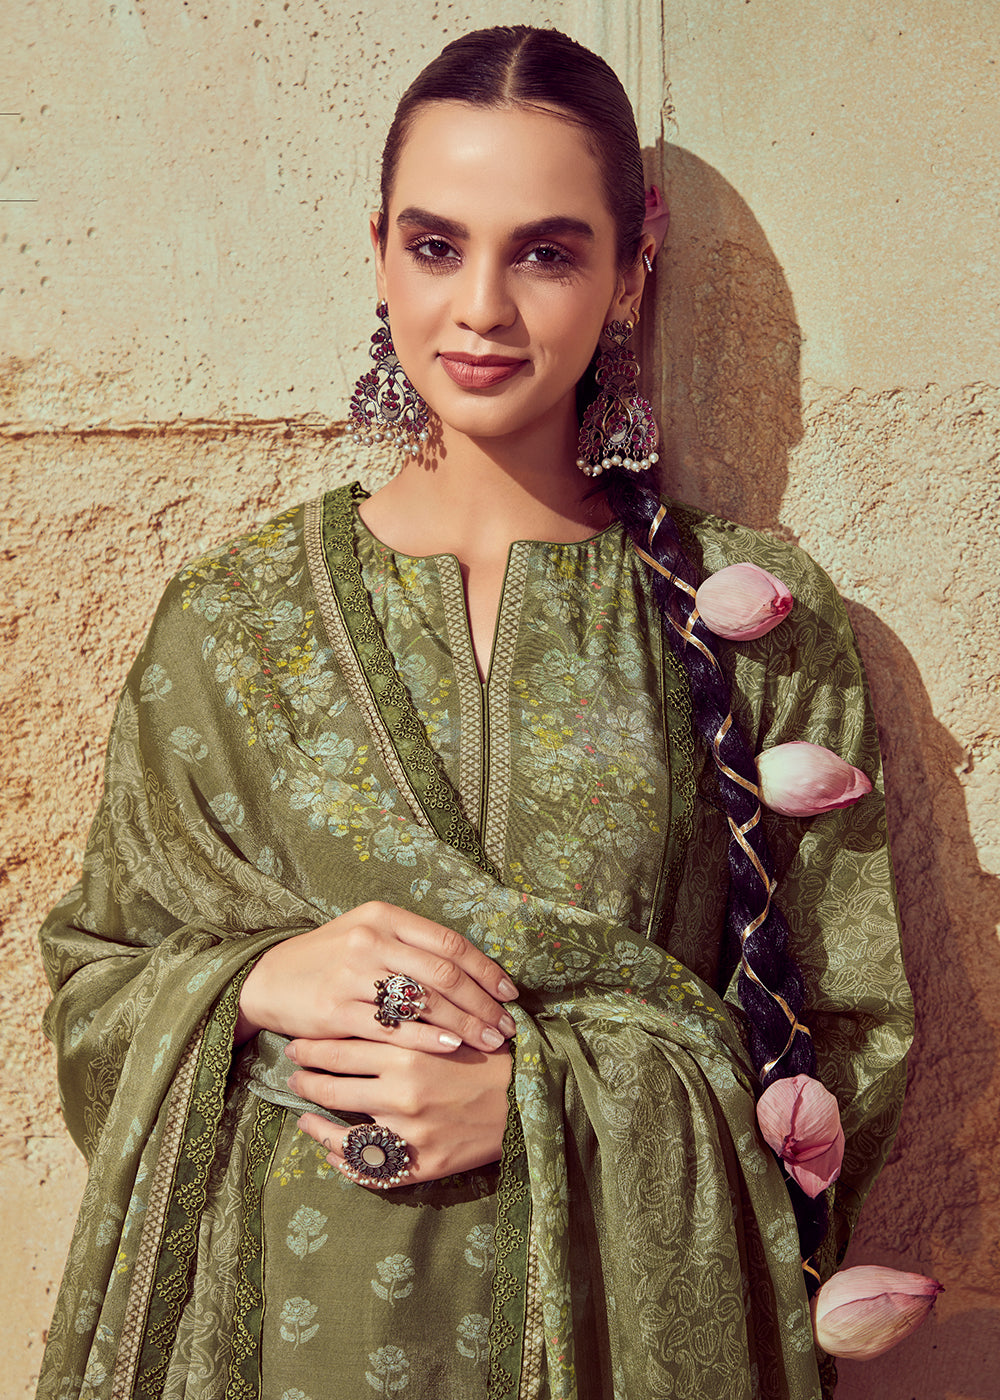 Buy Now Digital Printed & Embroidered Mehndi Green Muslin Salwar Suit Online in USA, UK, Canada, Germany, Australia & Worldwide at Empress Clothing.